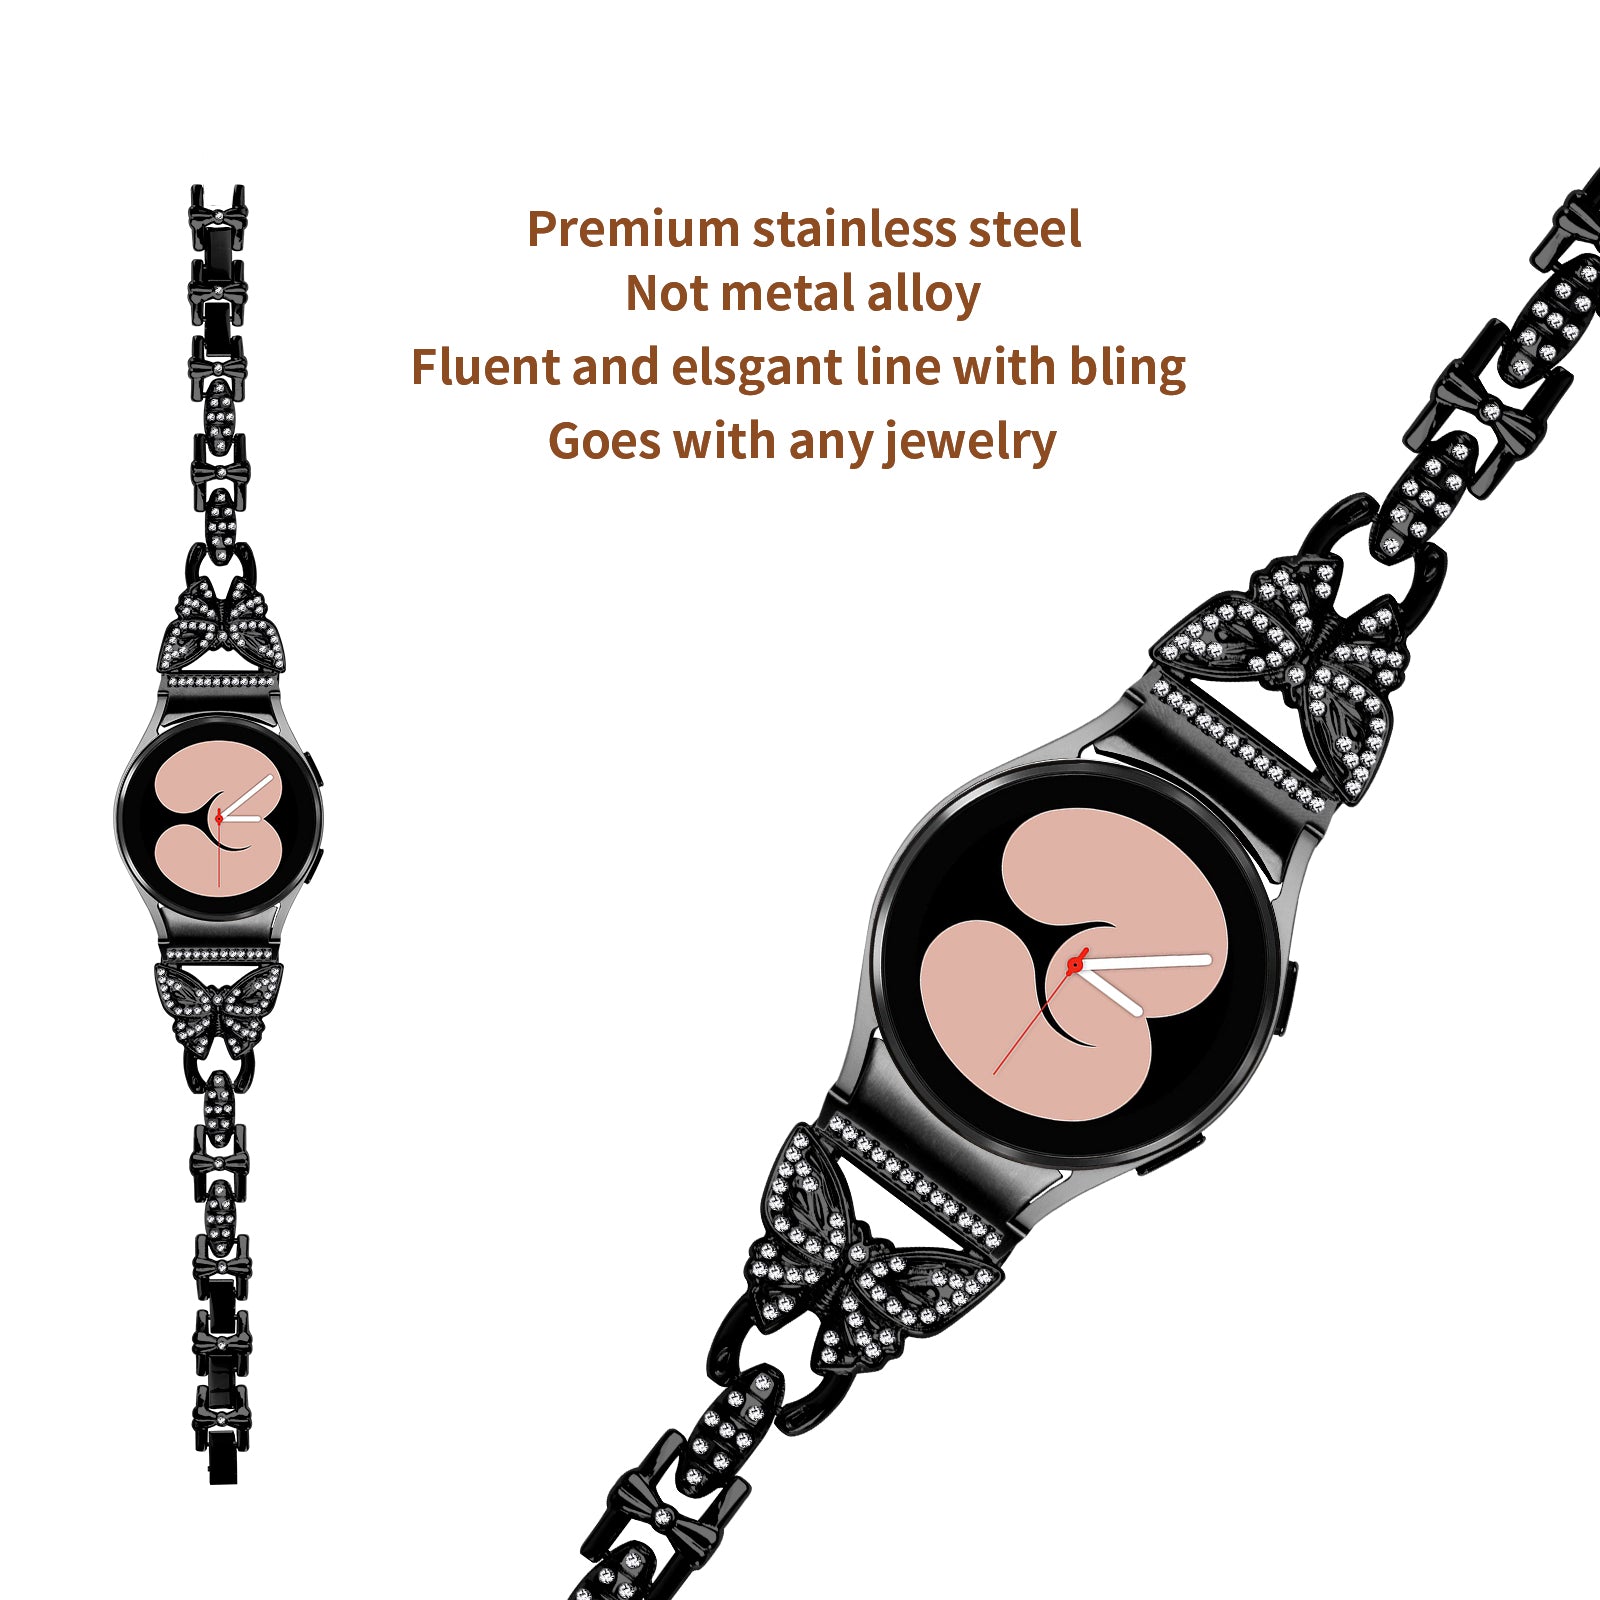 Stainless Steel Band for Samsung Galaxy Watch4 40mm 44mm / Watch4 Classic 42mm 46mm / Watch 5 40mm 44mm , Rhinestone Decor 20mm Watch Strap with Connector - Black